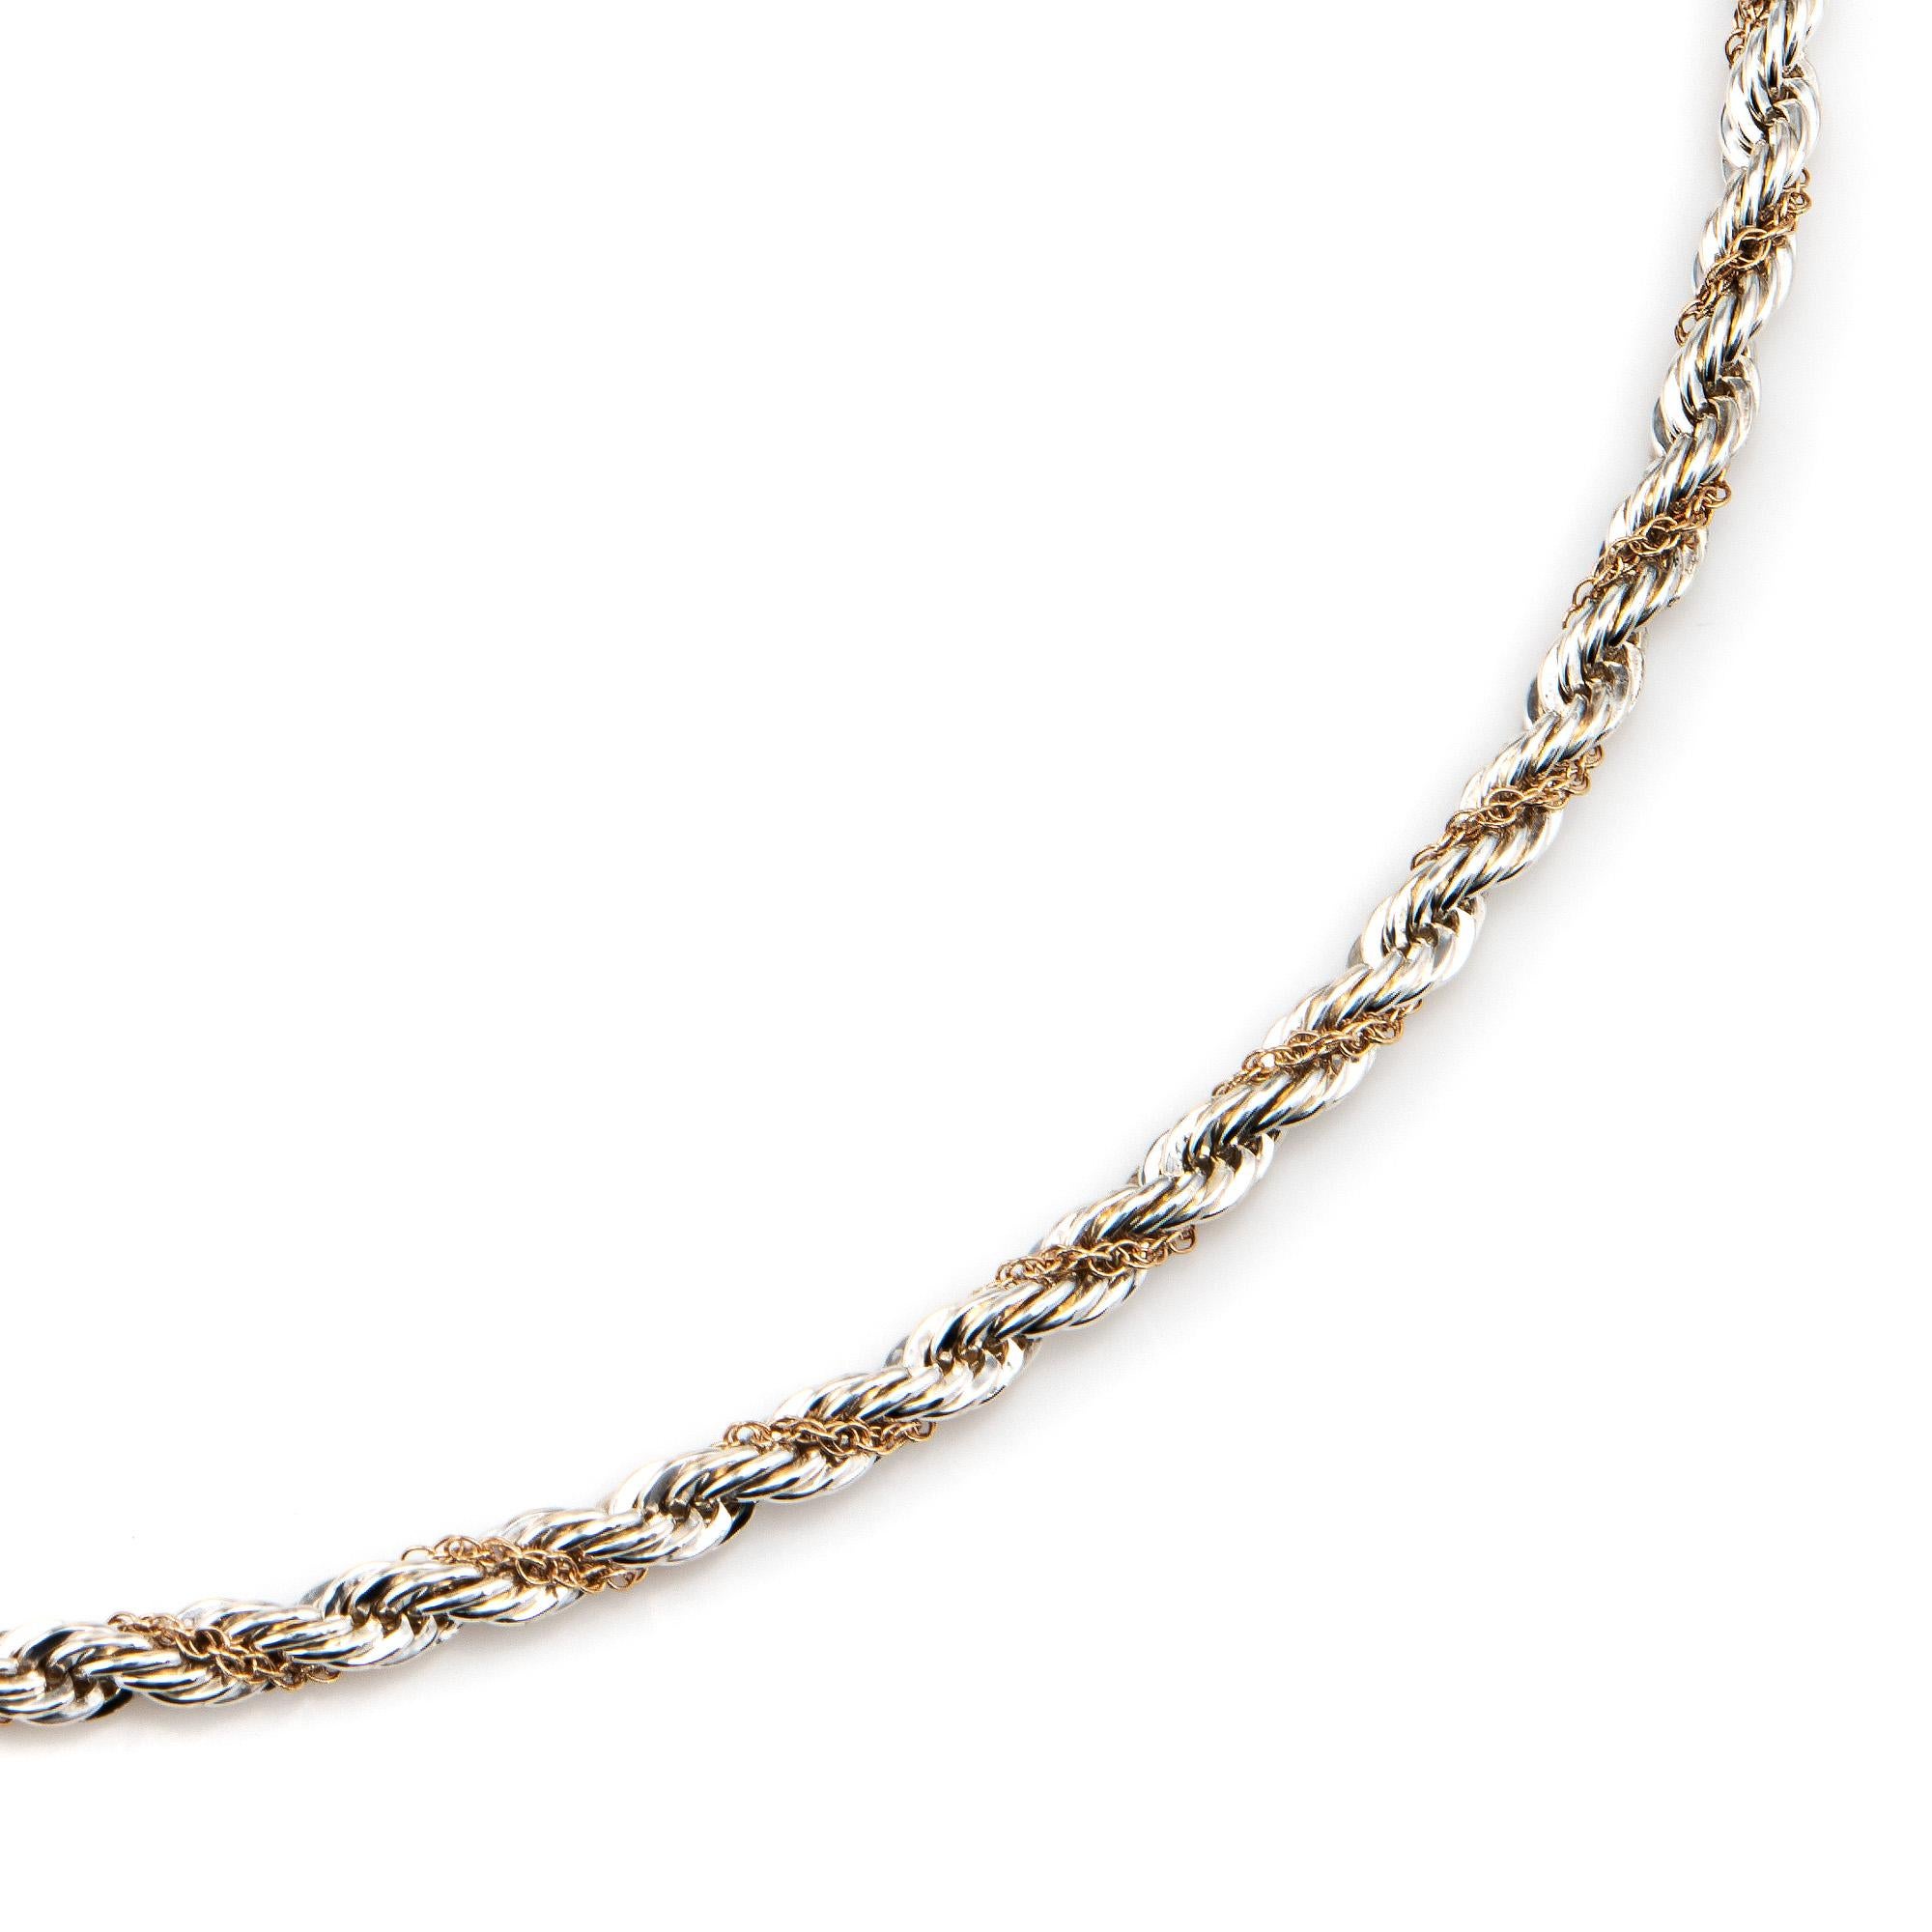 Elegant and finely detailed vintage Tiffany & Co rope necklace crafted in sterling silver and 14k yellow gold.  

The necklace is a retired piece and no longer made by Tiffany & Co. The long rope necklace (24 inches) has a substantial feel and is